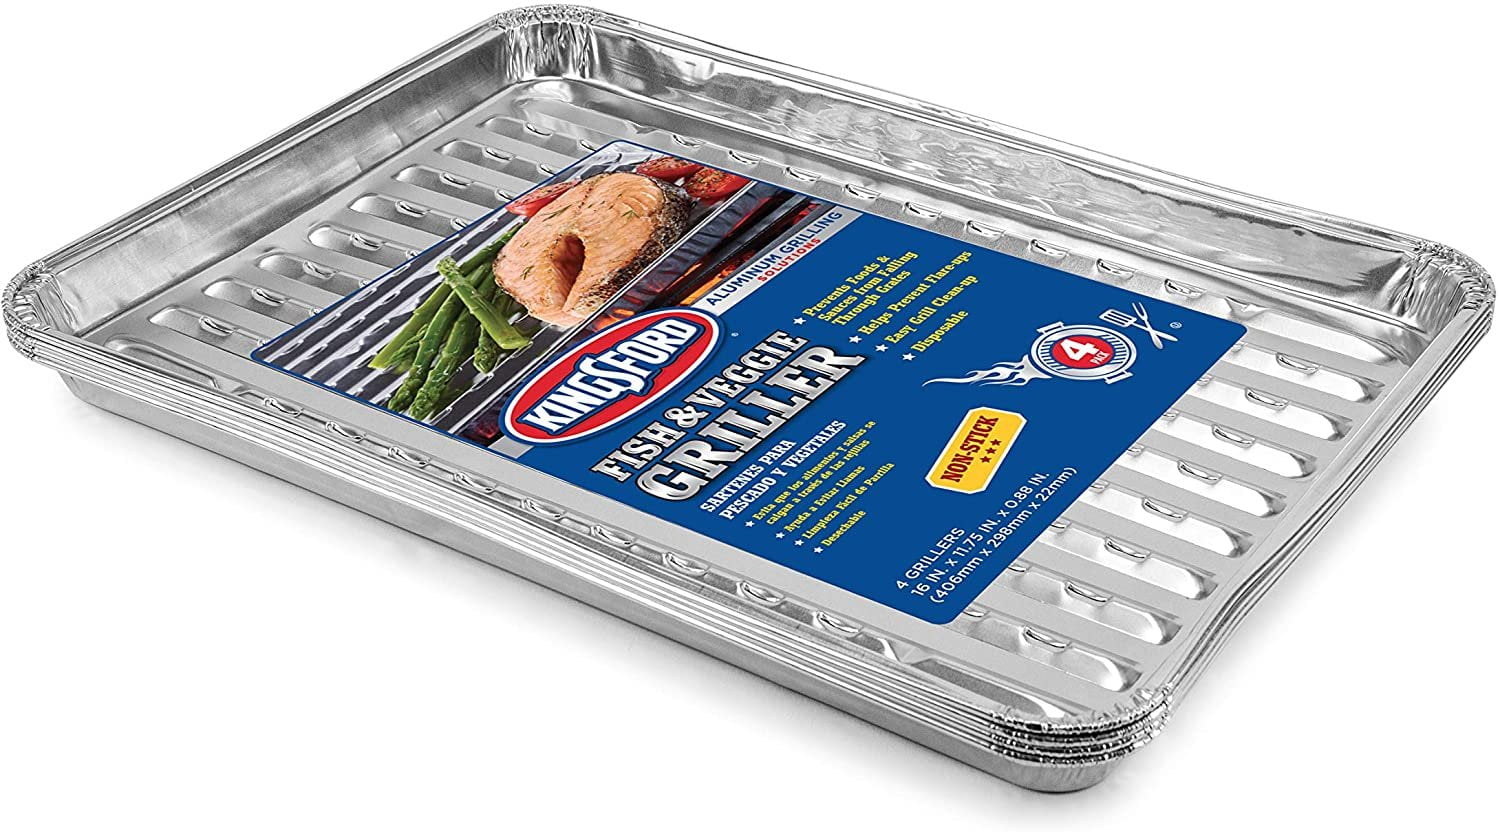 Kingsford All-Purpose Pans 3549994100 - The Home Depot